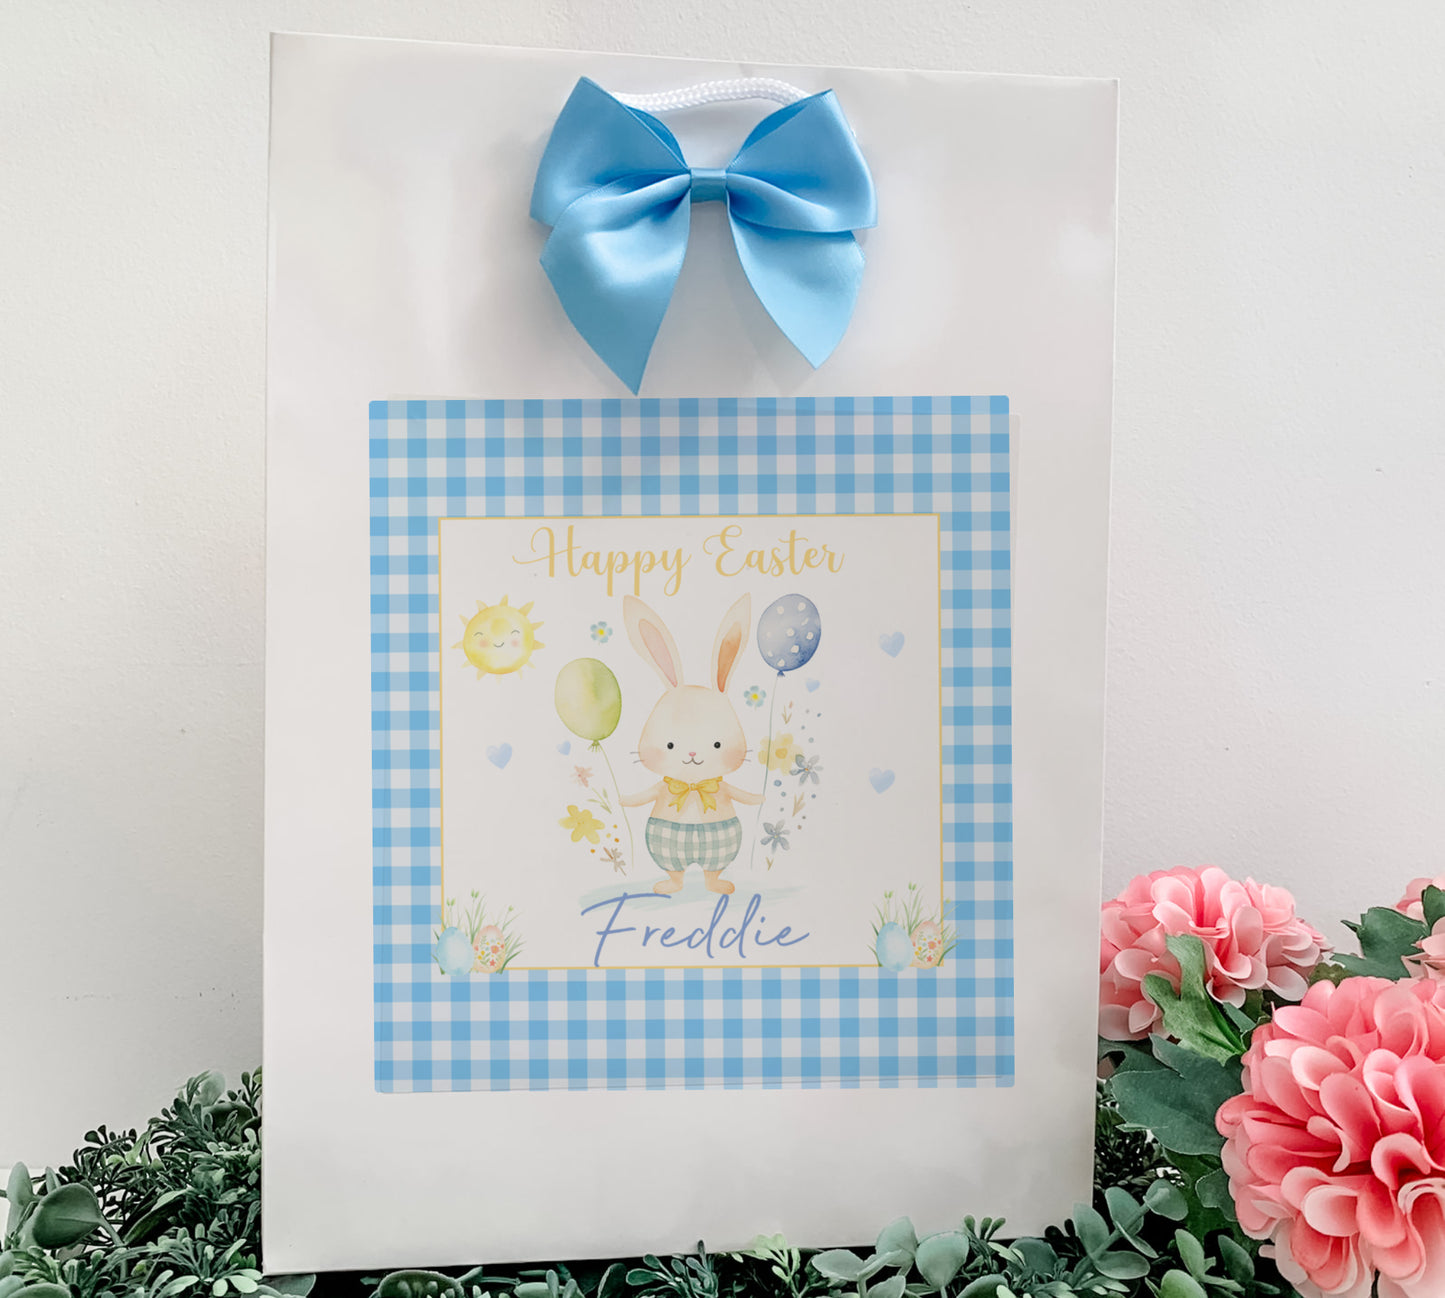 a picture of a happy easter card with a blue bow